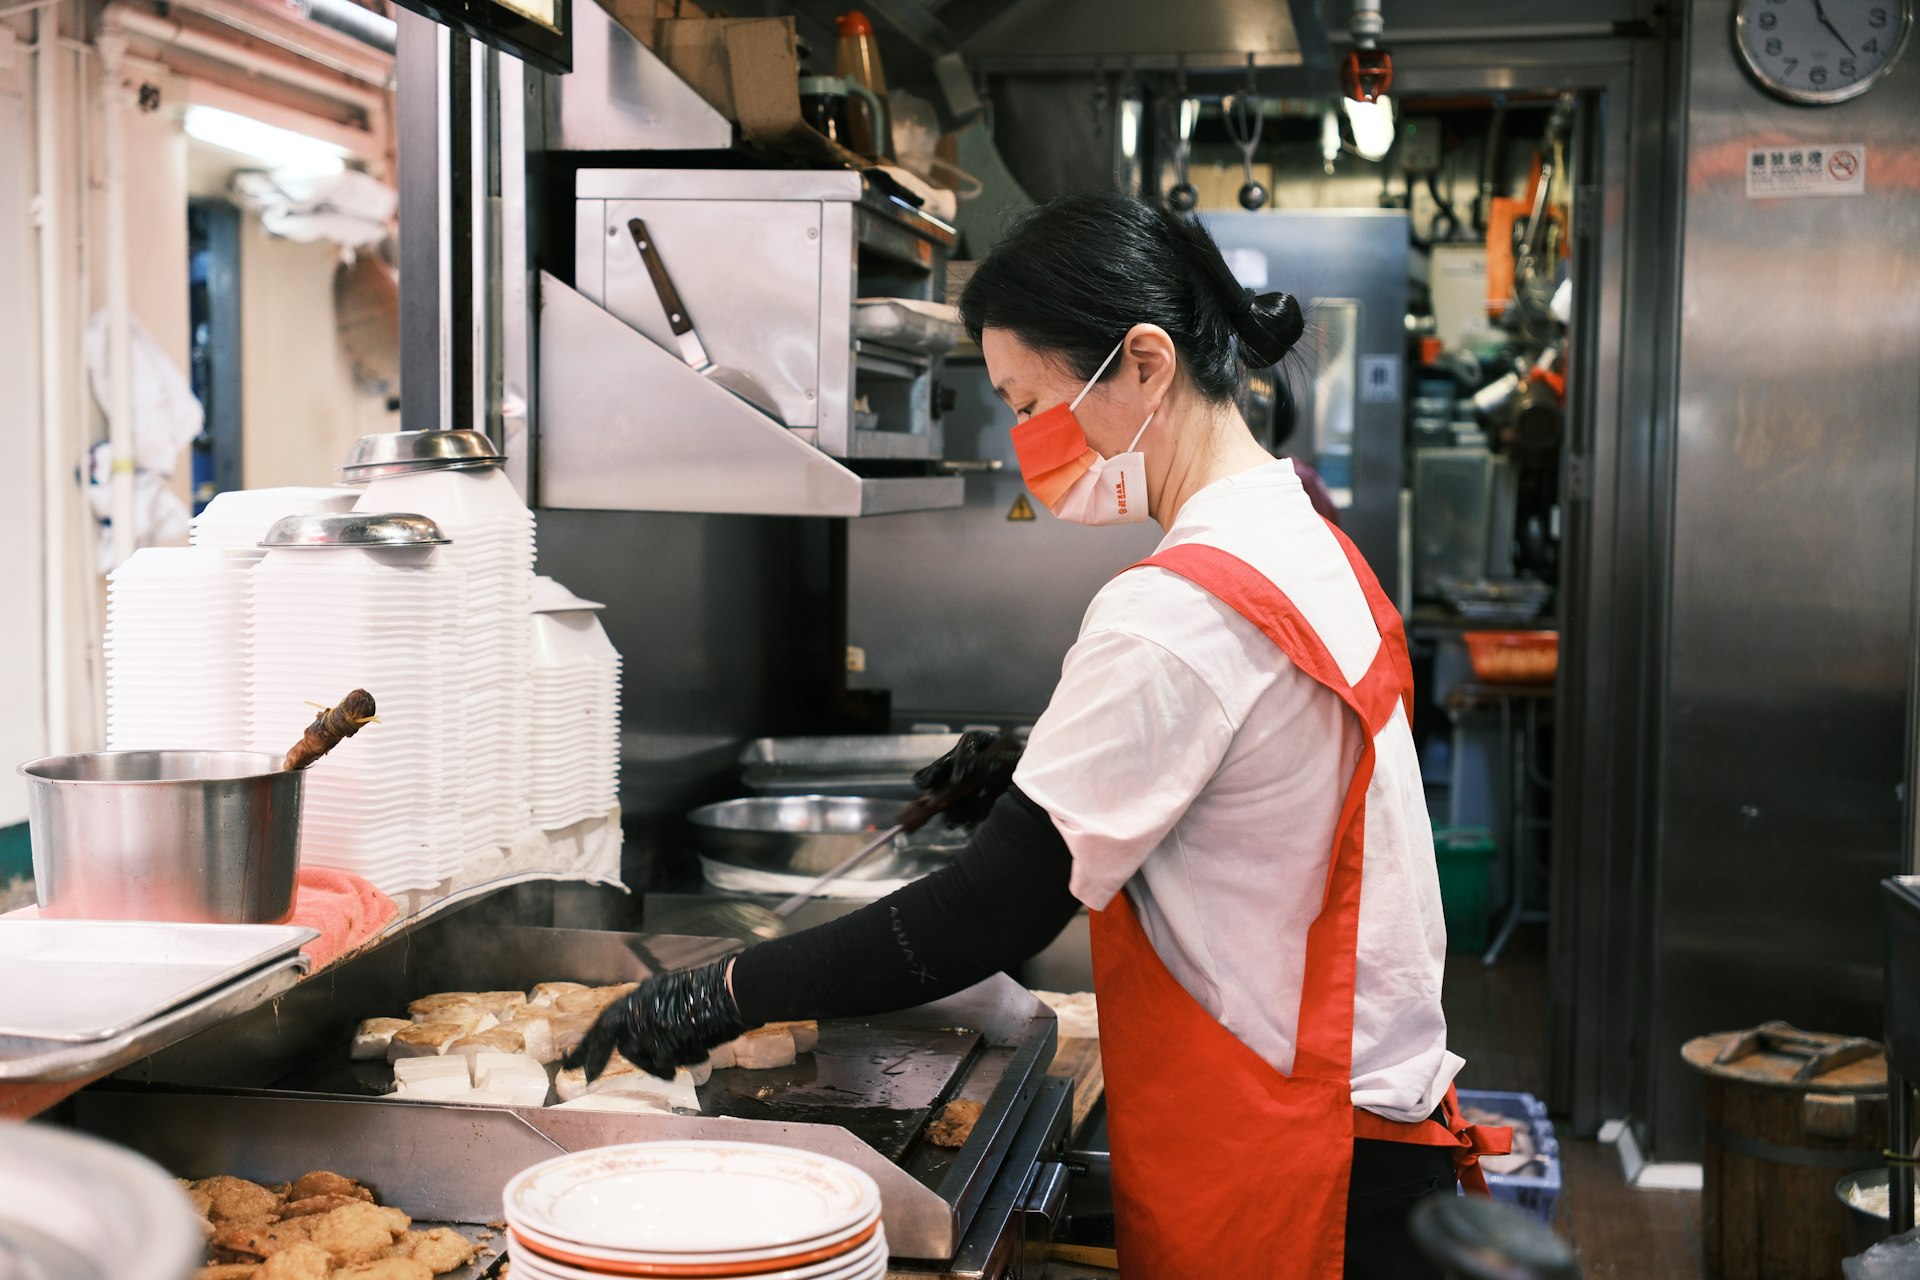 A woman prepares fried tofu on a griddle in an industrial kitchen